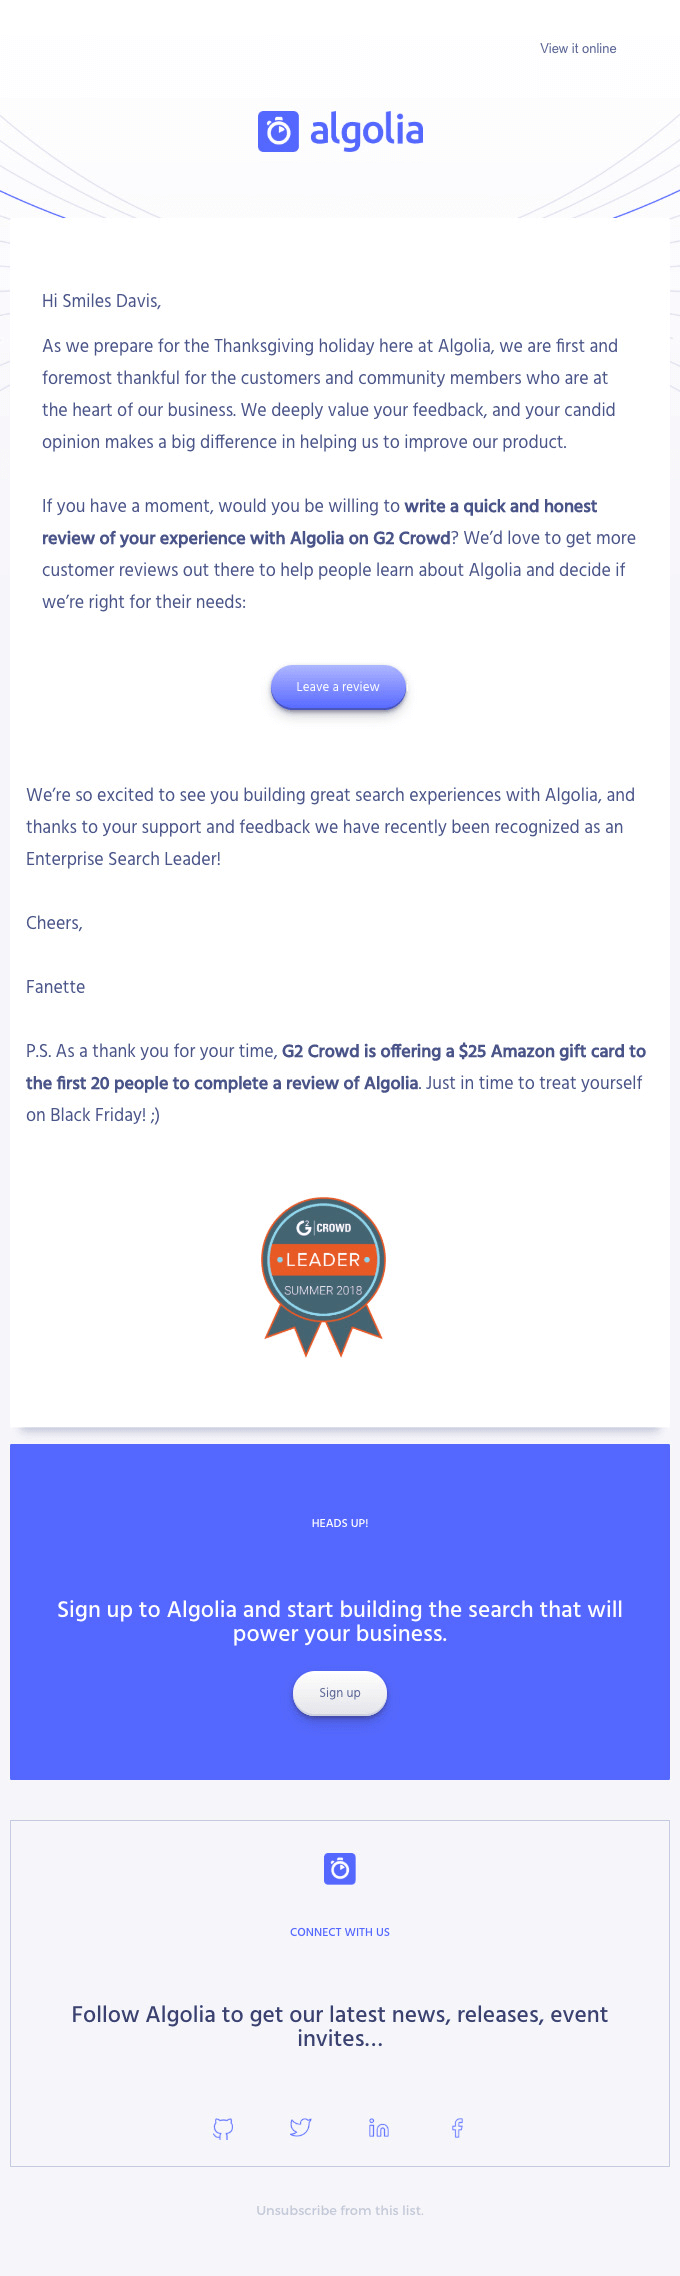 A survey email example by Algolia 